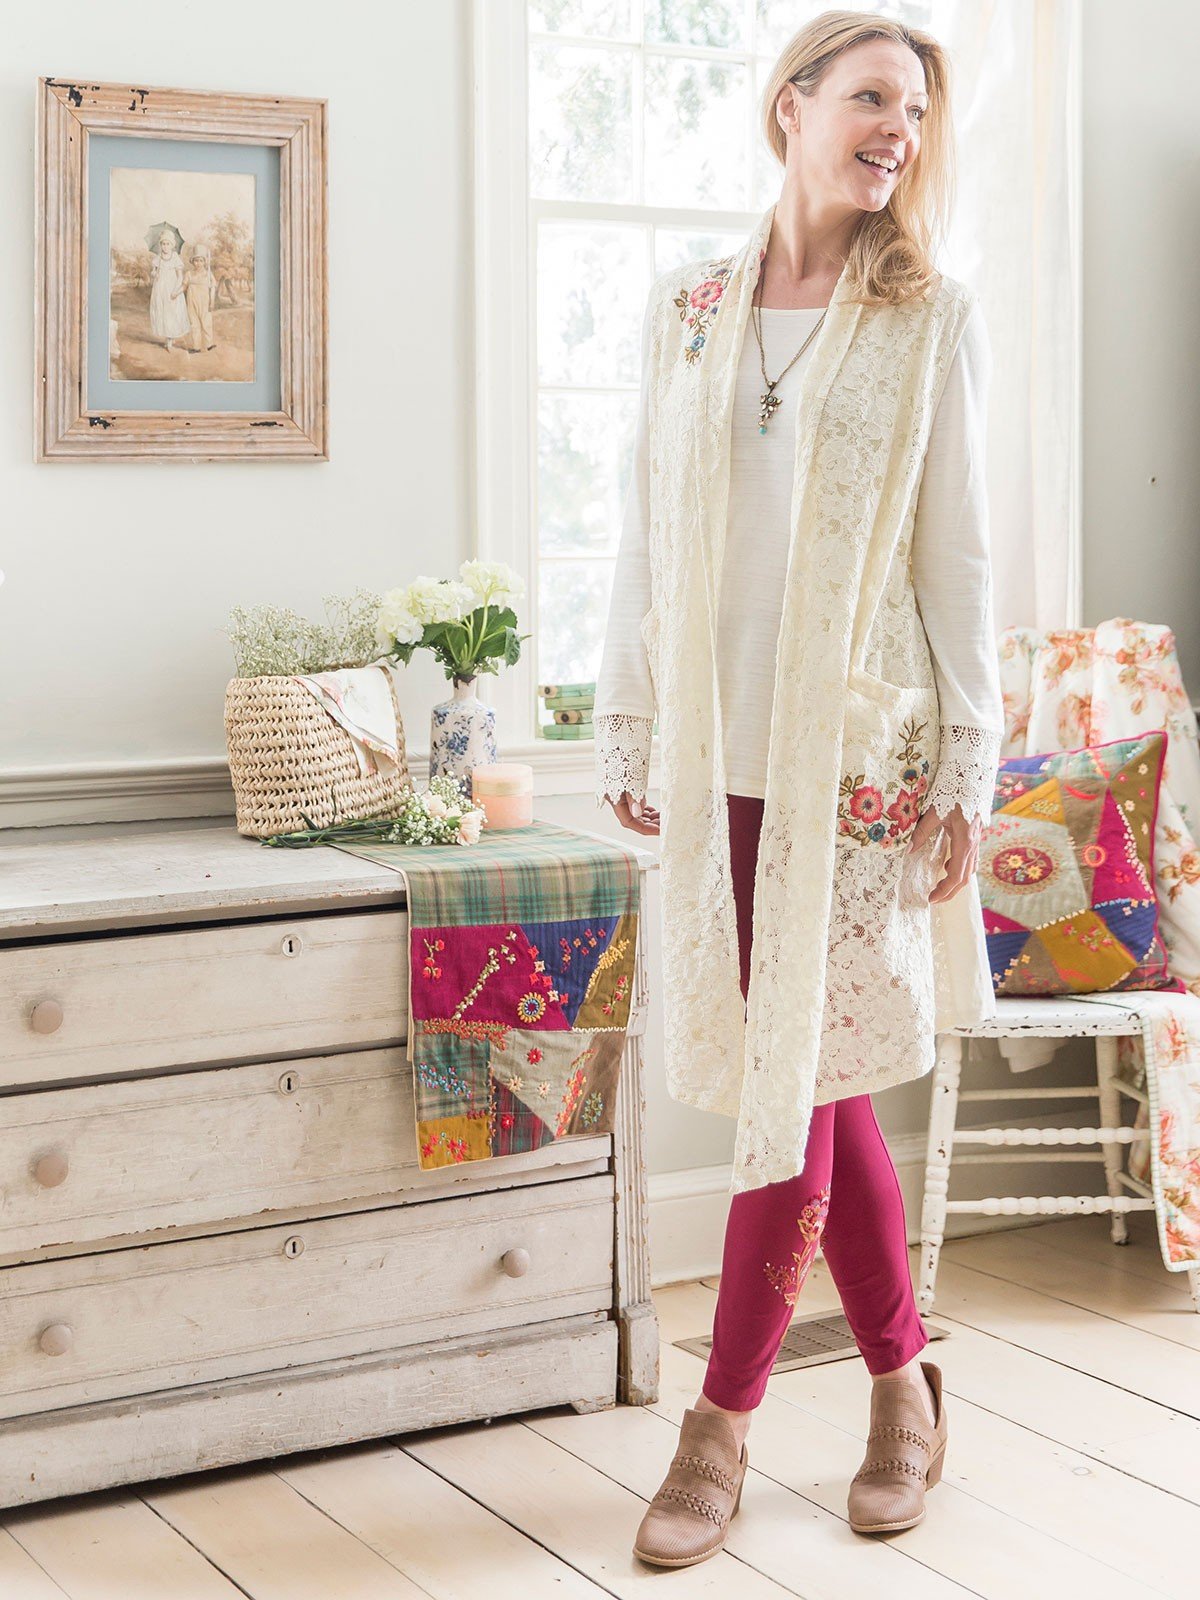 Free Spirit Duster in Ecru | April Cornell - SOLD OUT